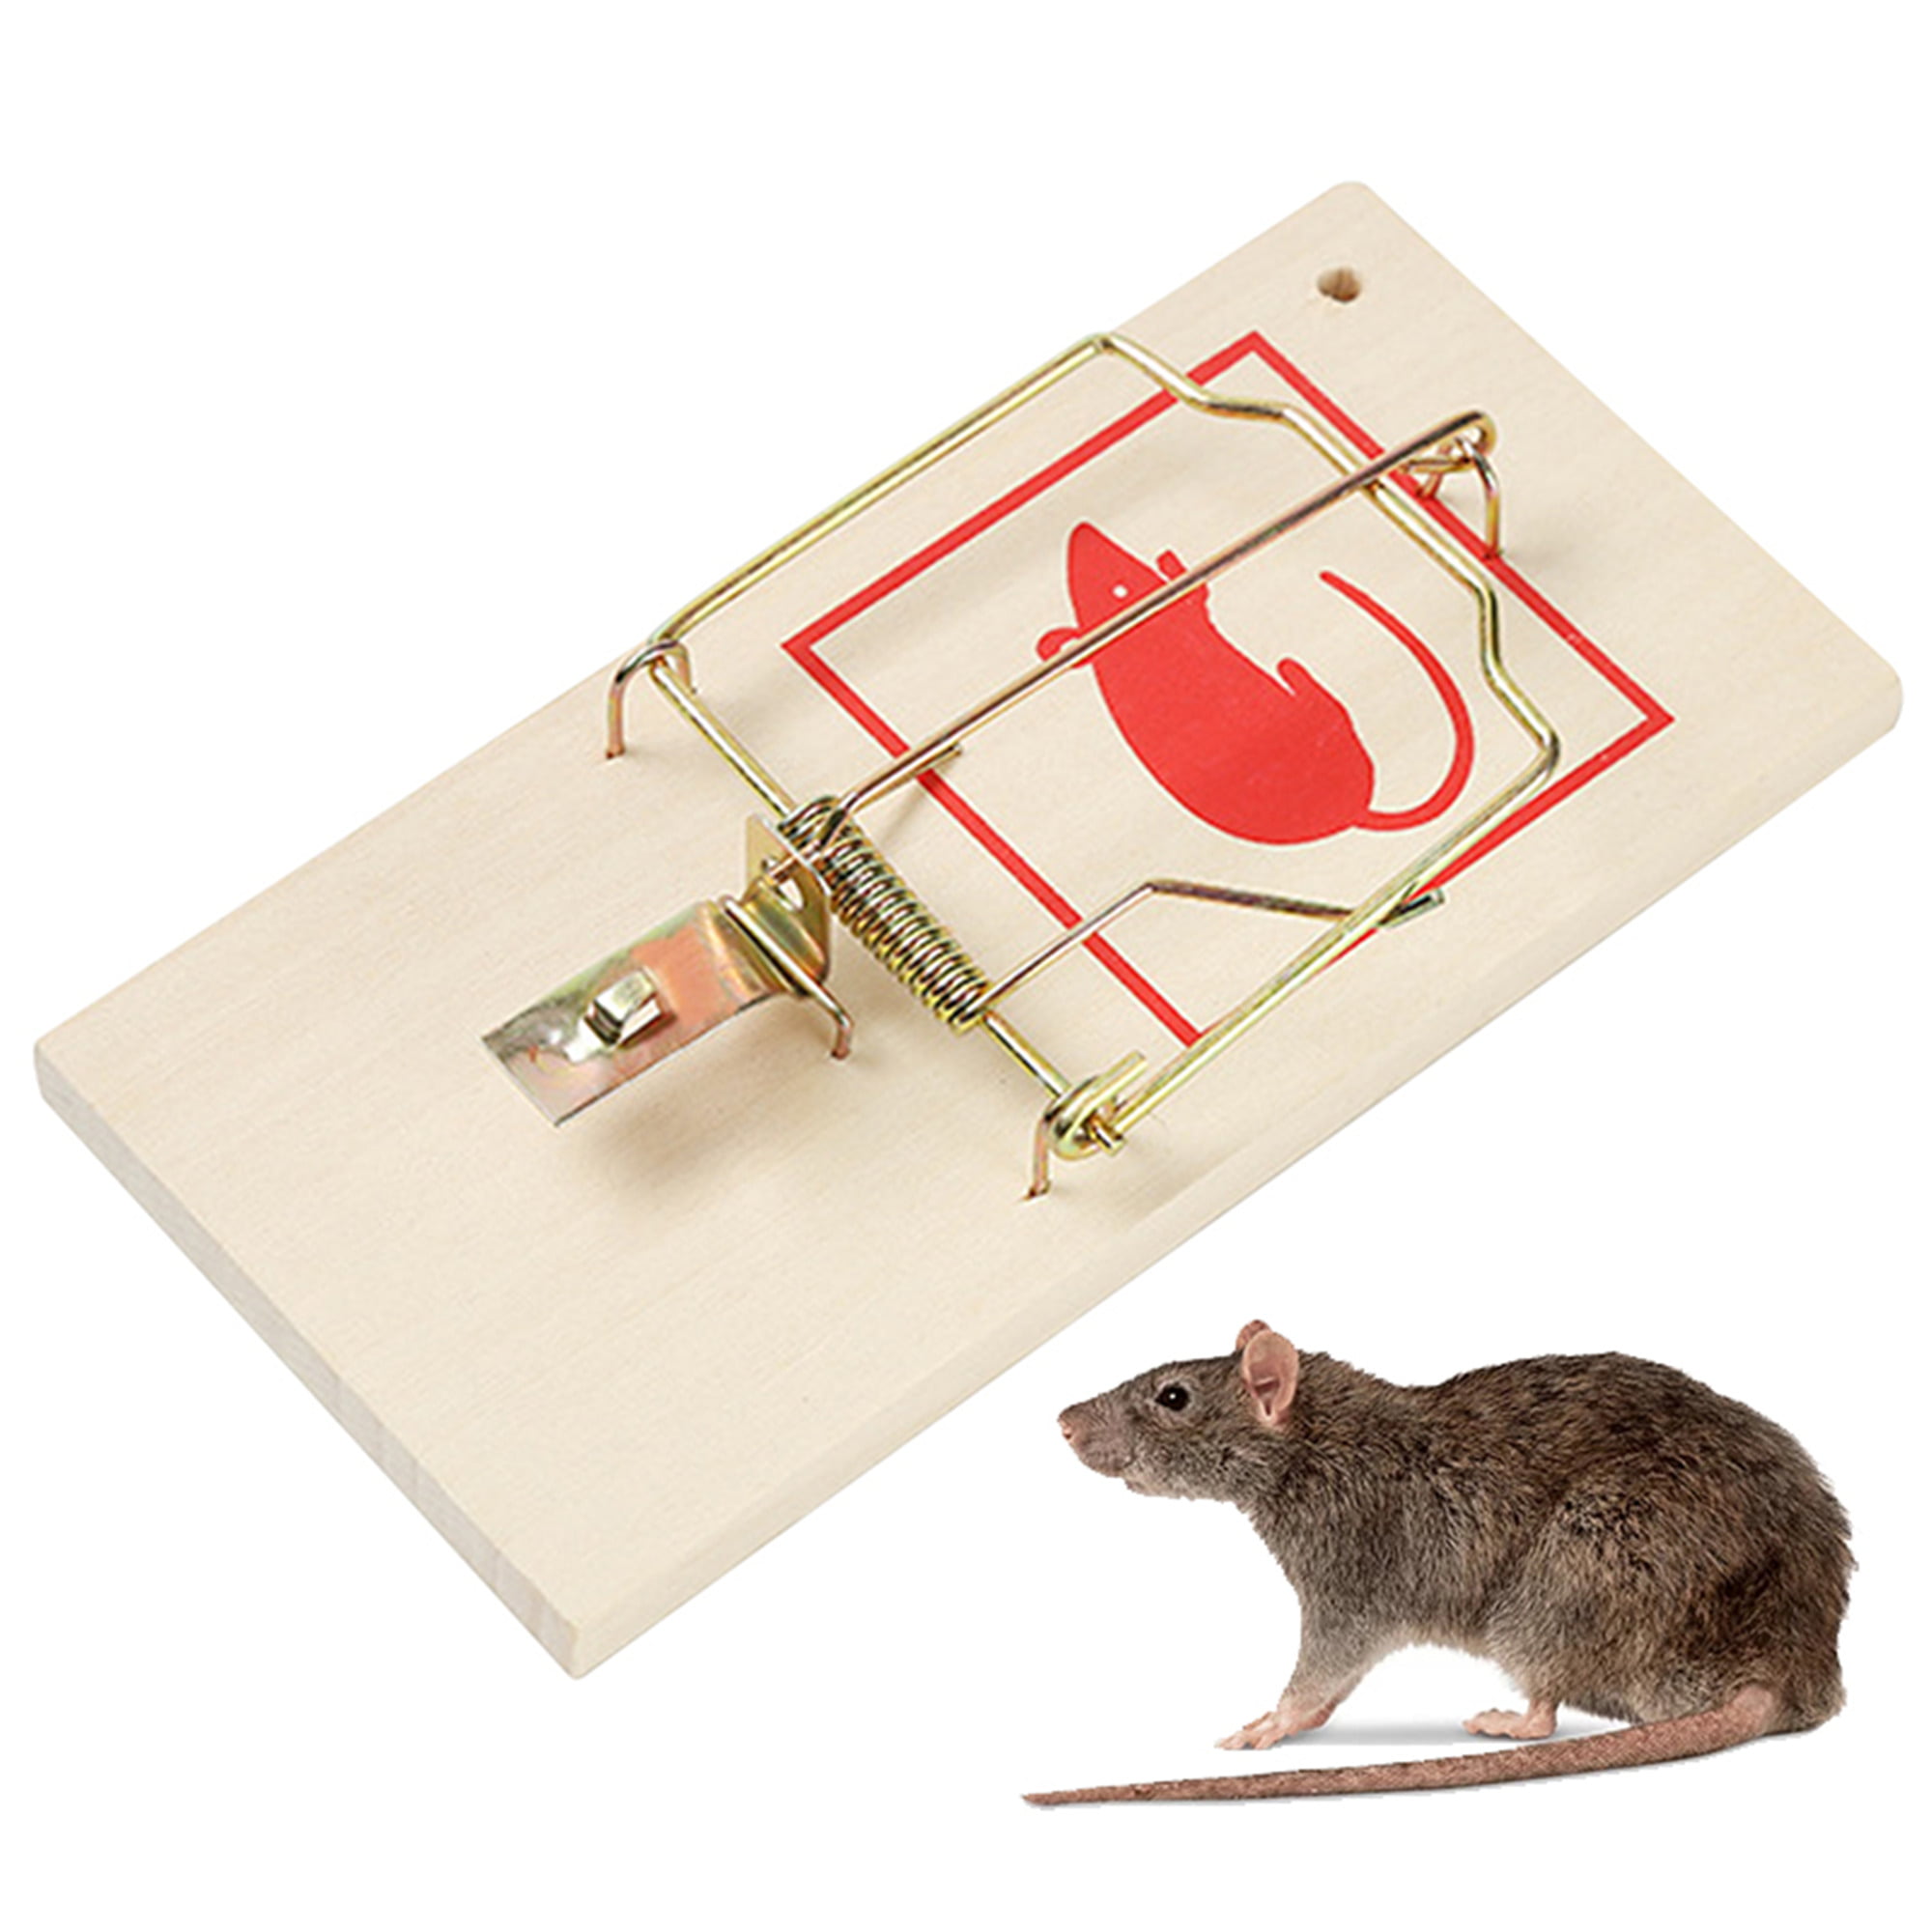 Elbourn Mouse Traps Indoor Mouse Trap for House Mice Traps for House Indoor Quick Effective Safe for Family and Pet, 8-Pack, Size: 14x7.5x6.5 cm